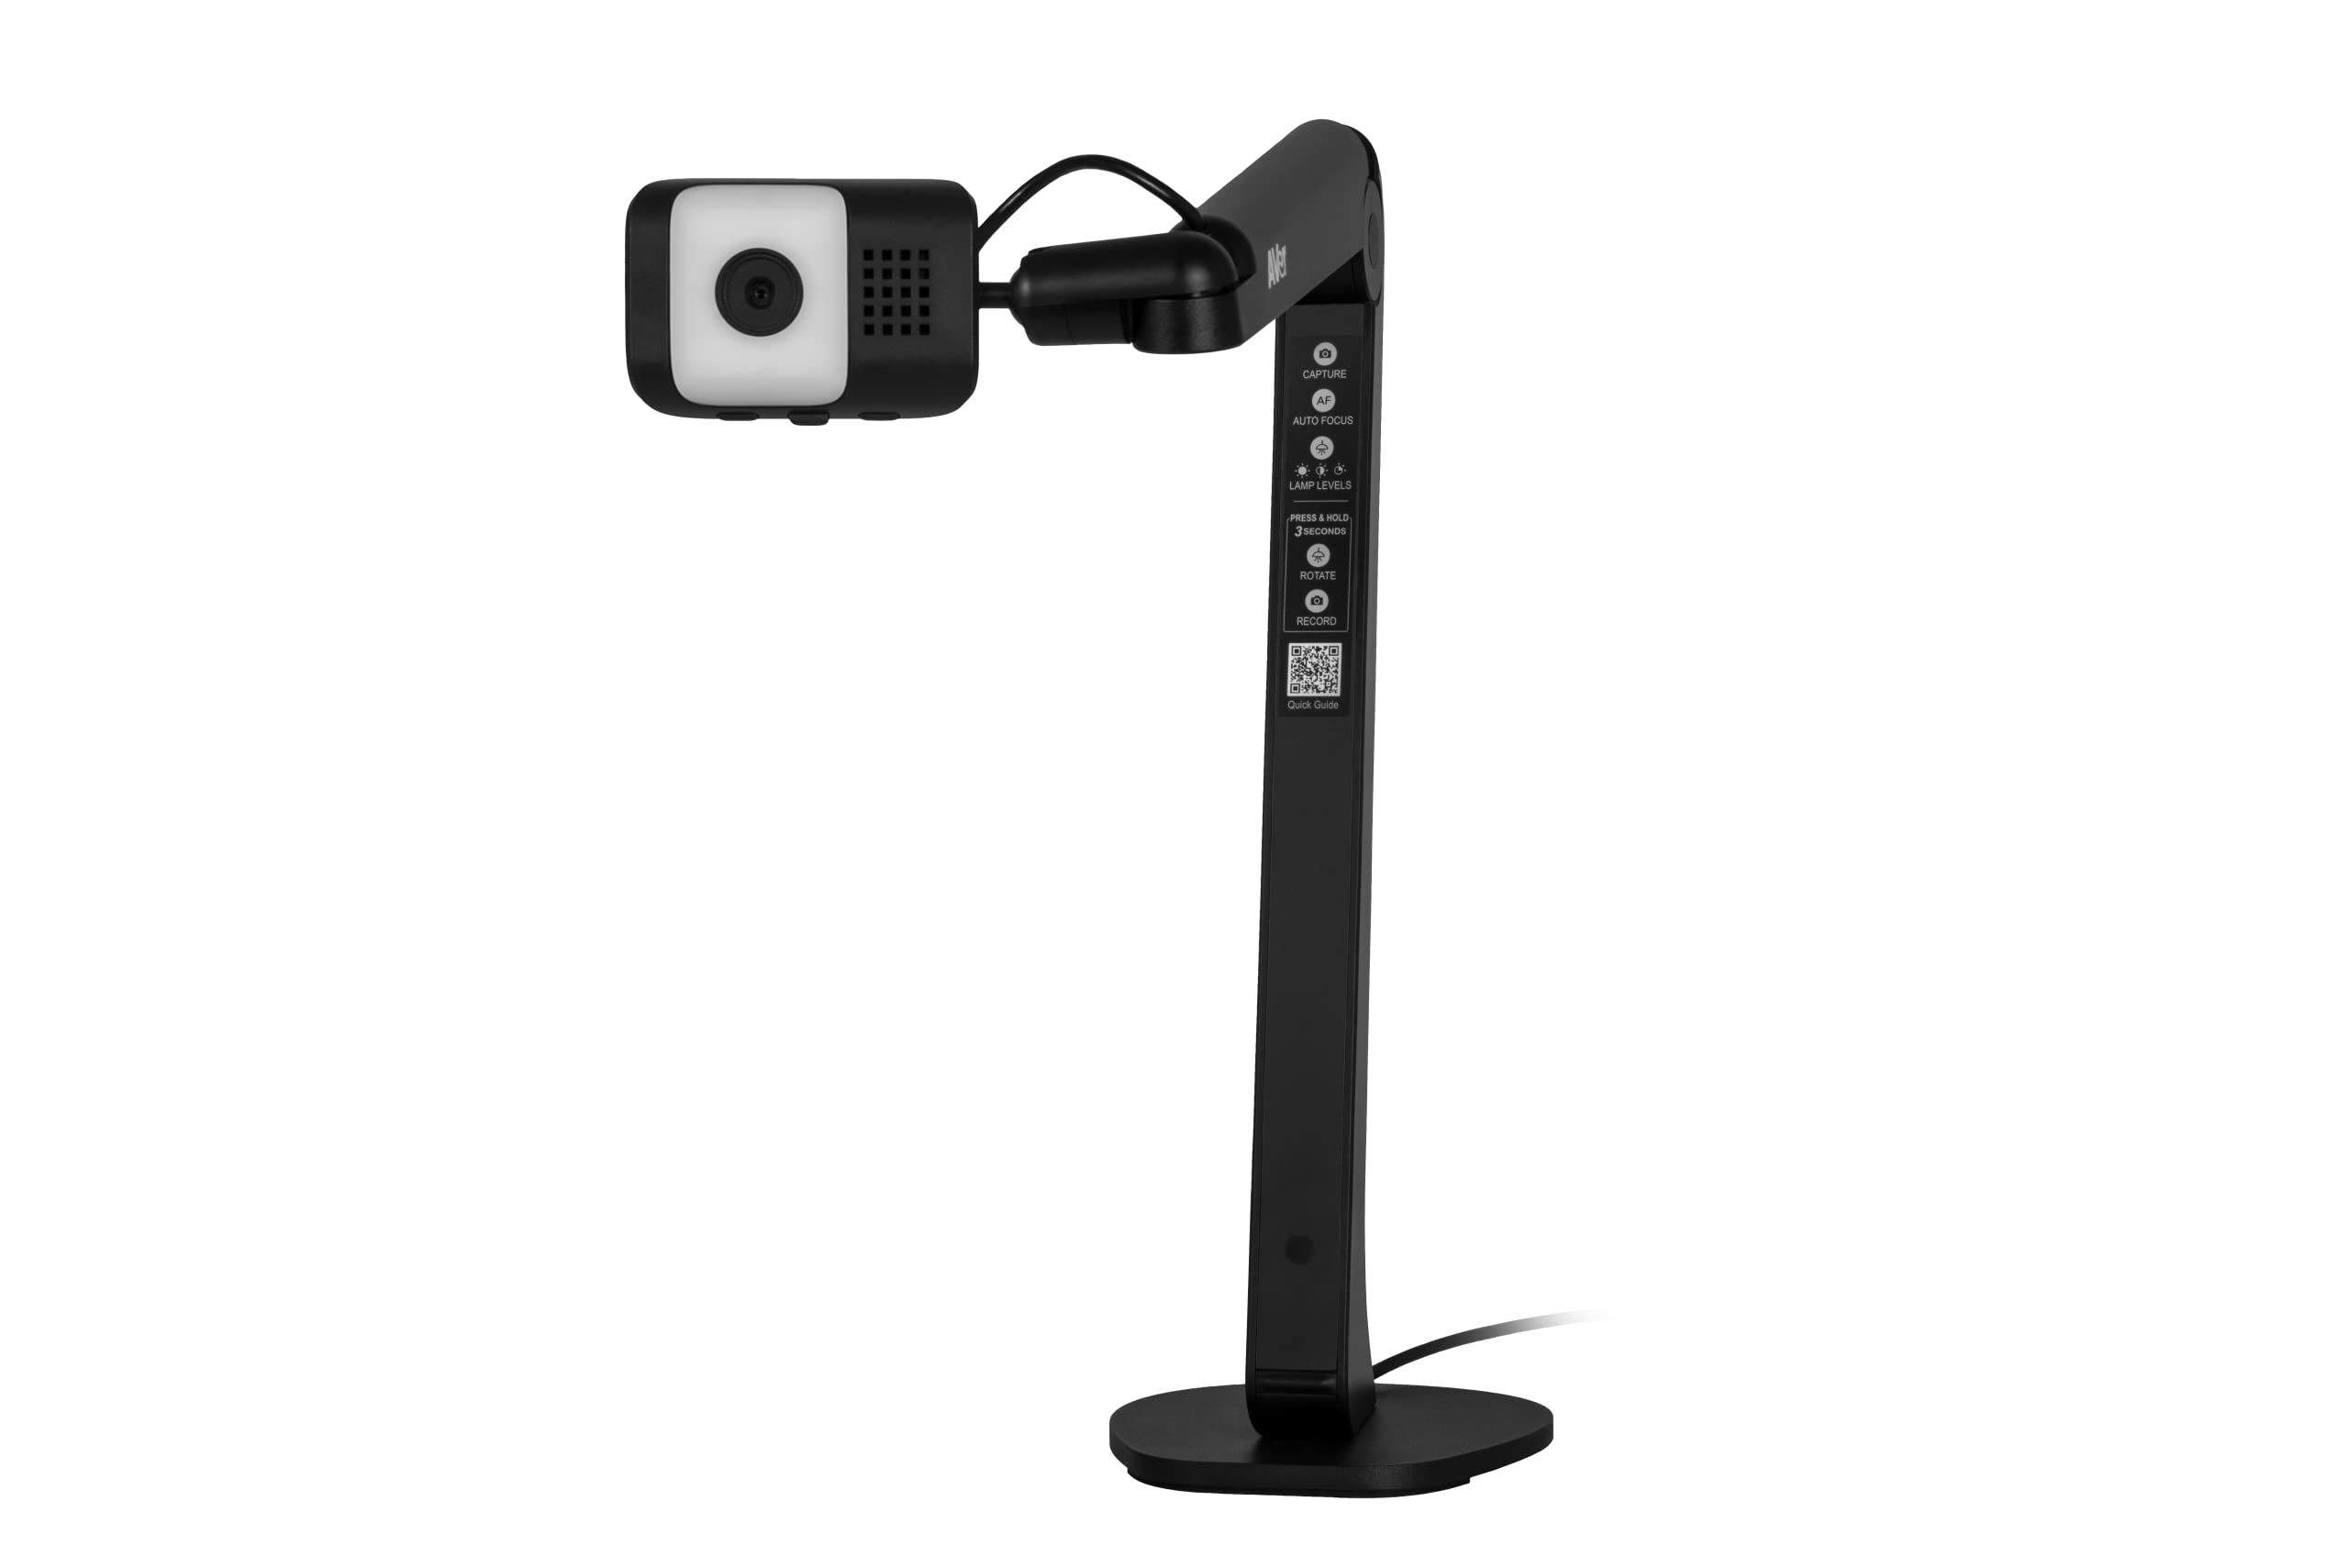 AVer M5 Document Camera - USB Webcam for Remote Video Conferencing - HD for PC, Mac, Chromebook, Zoom, and More - Perfect for Distance Learning, Classroom Teaching, Recording, Working, & More